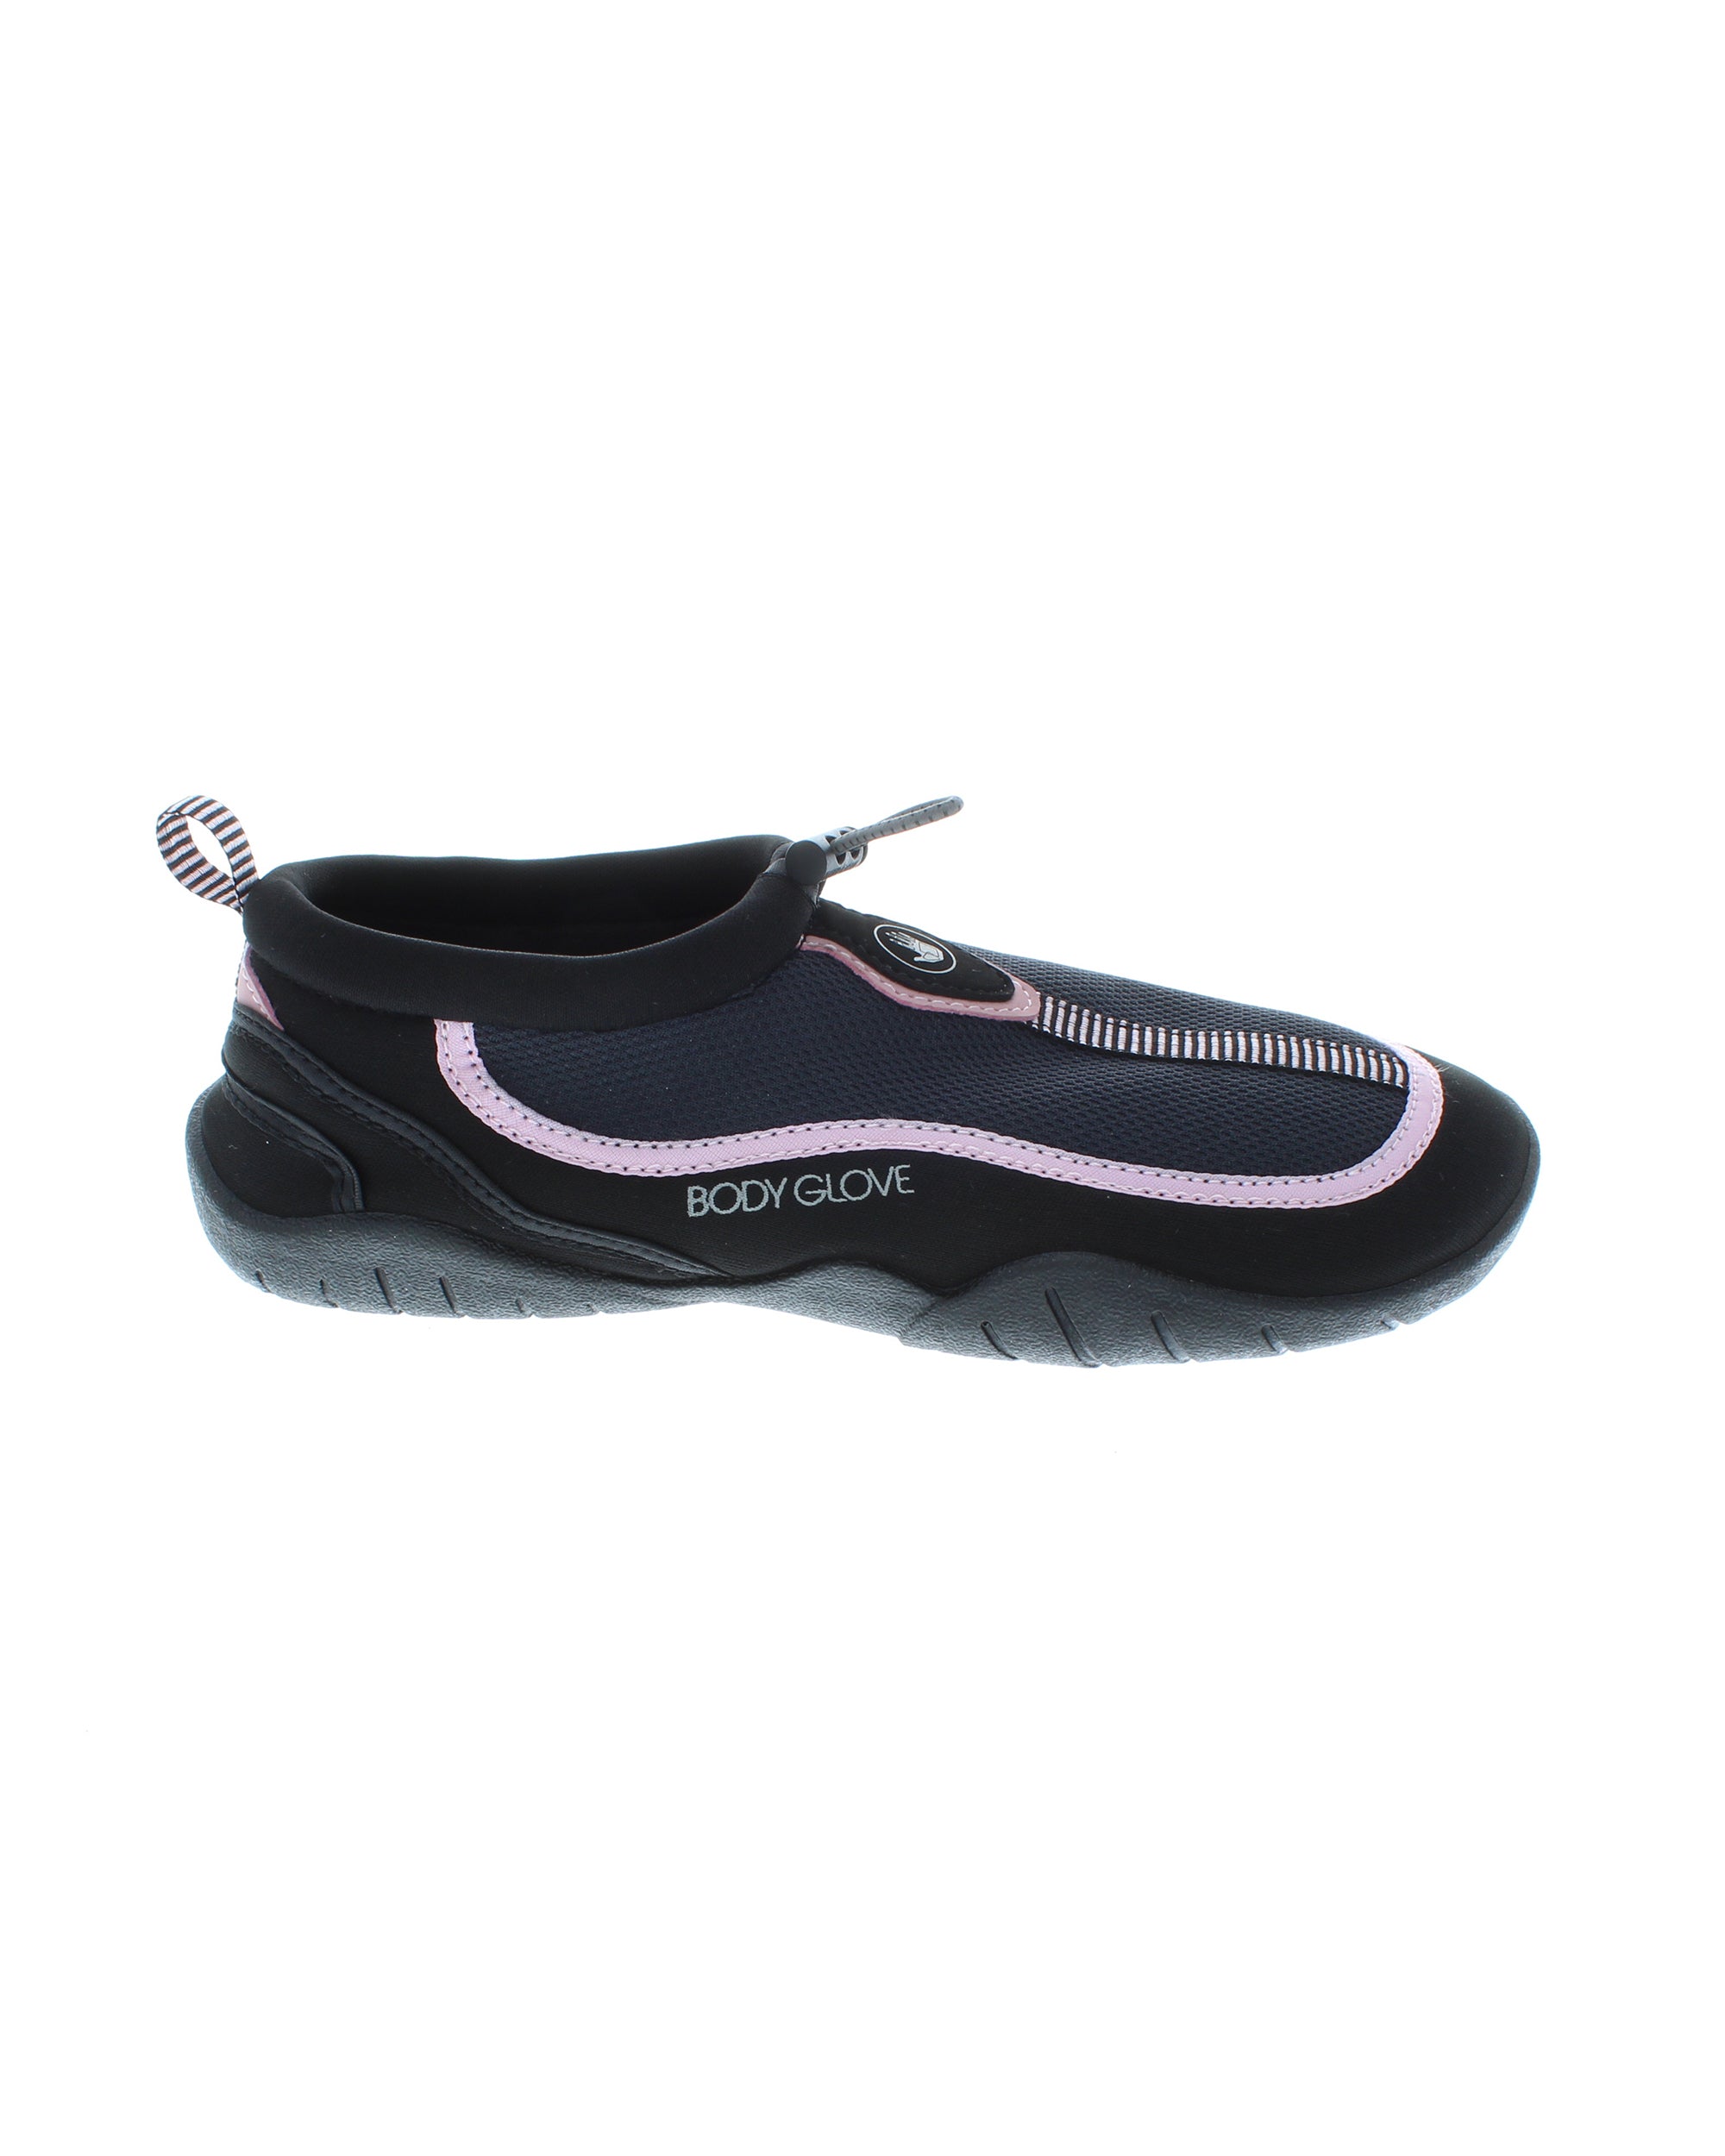 Riptide III Water Shoes - Black/Cassis 